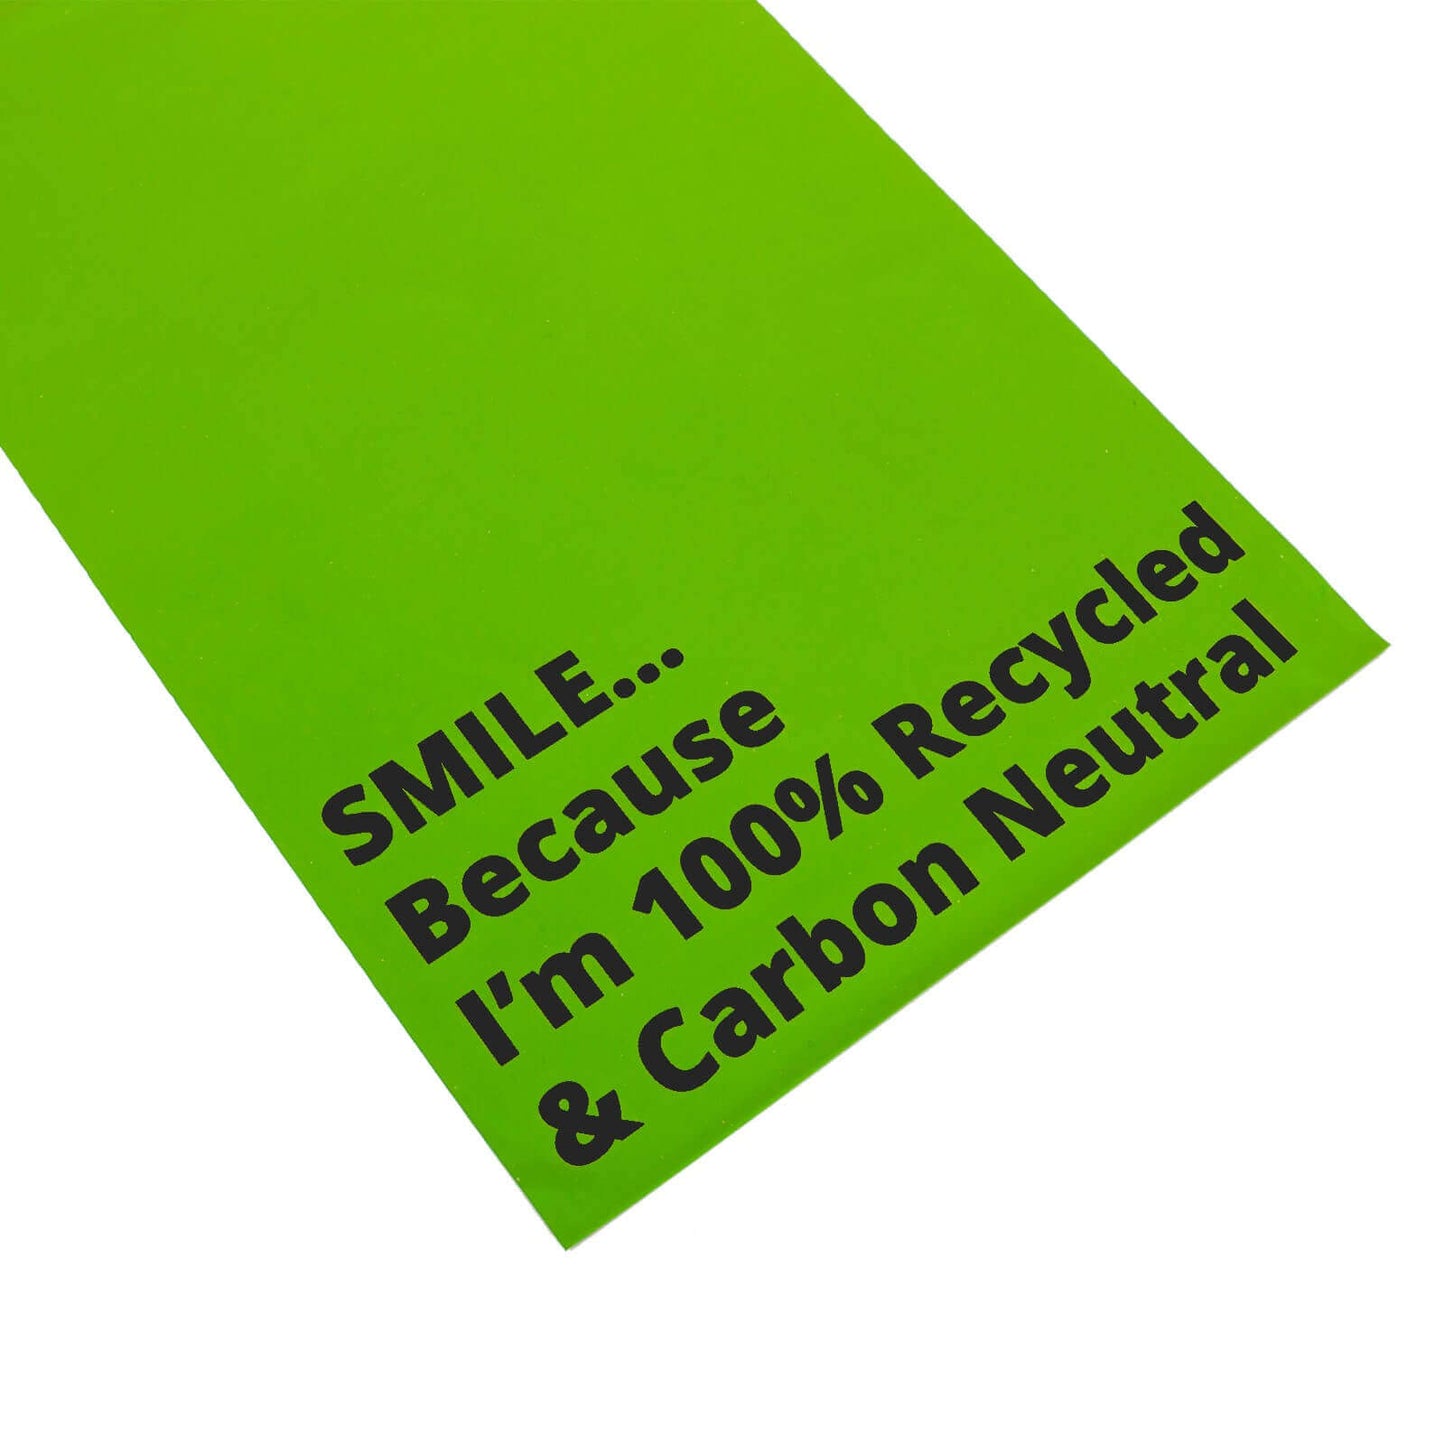 Bottom of 10 x 14 green recycled Mailing Bag